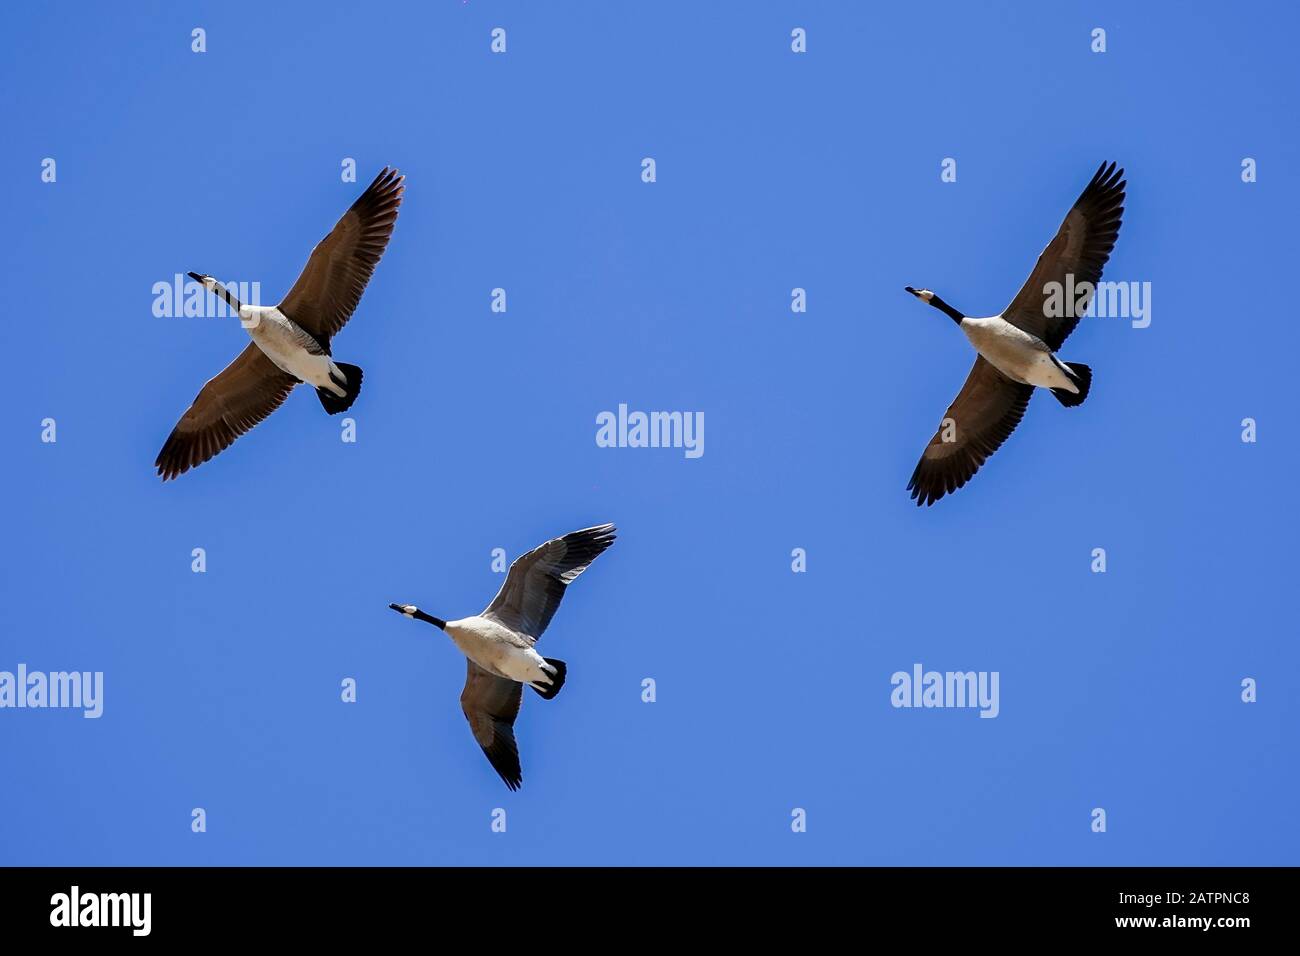 3 Canadian geese (Branta Canadensis) flying in formation with a blue sky. Scottsdale, Arizona. Stock Photo